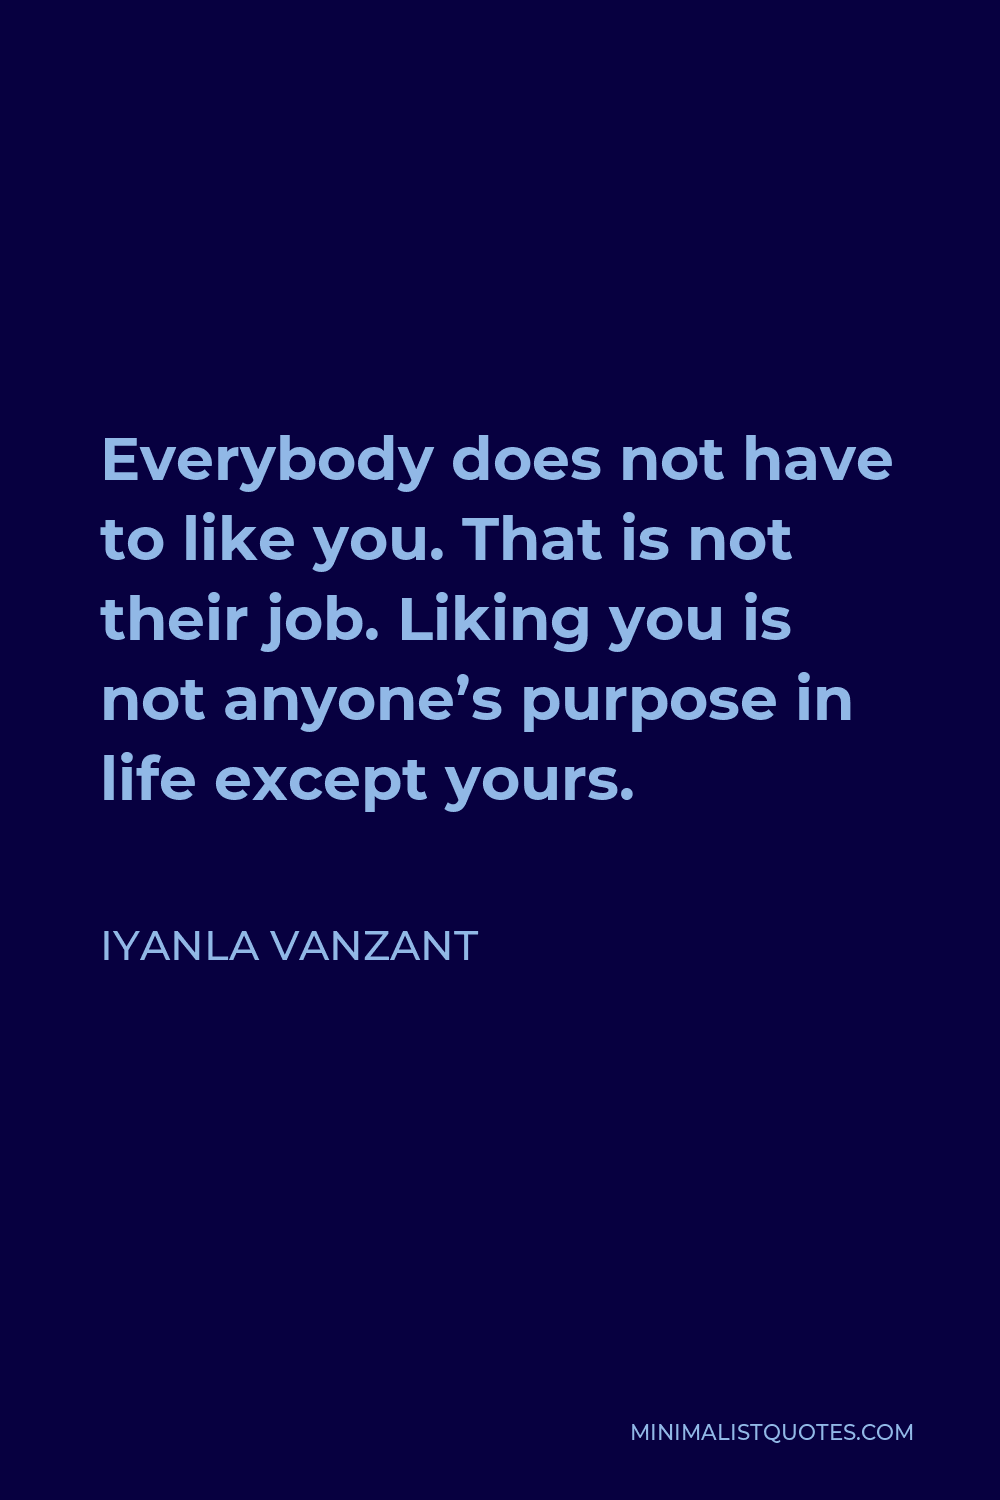 Iyanla Vanzant Quote - Everybody does not have to like you. That is not their job. Liking you is not anyone’s purpose in life except yours.